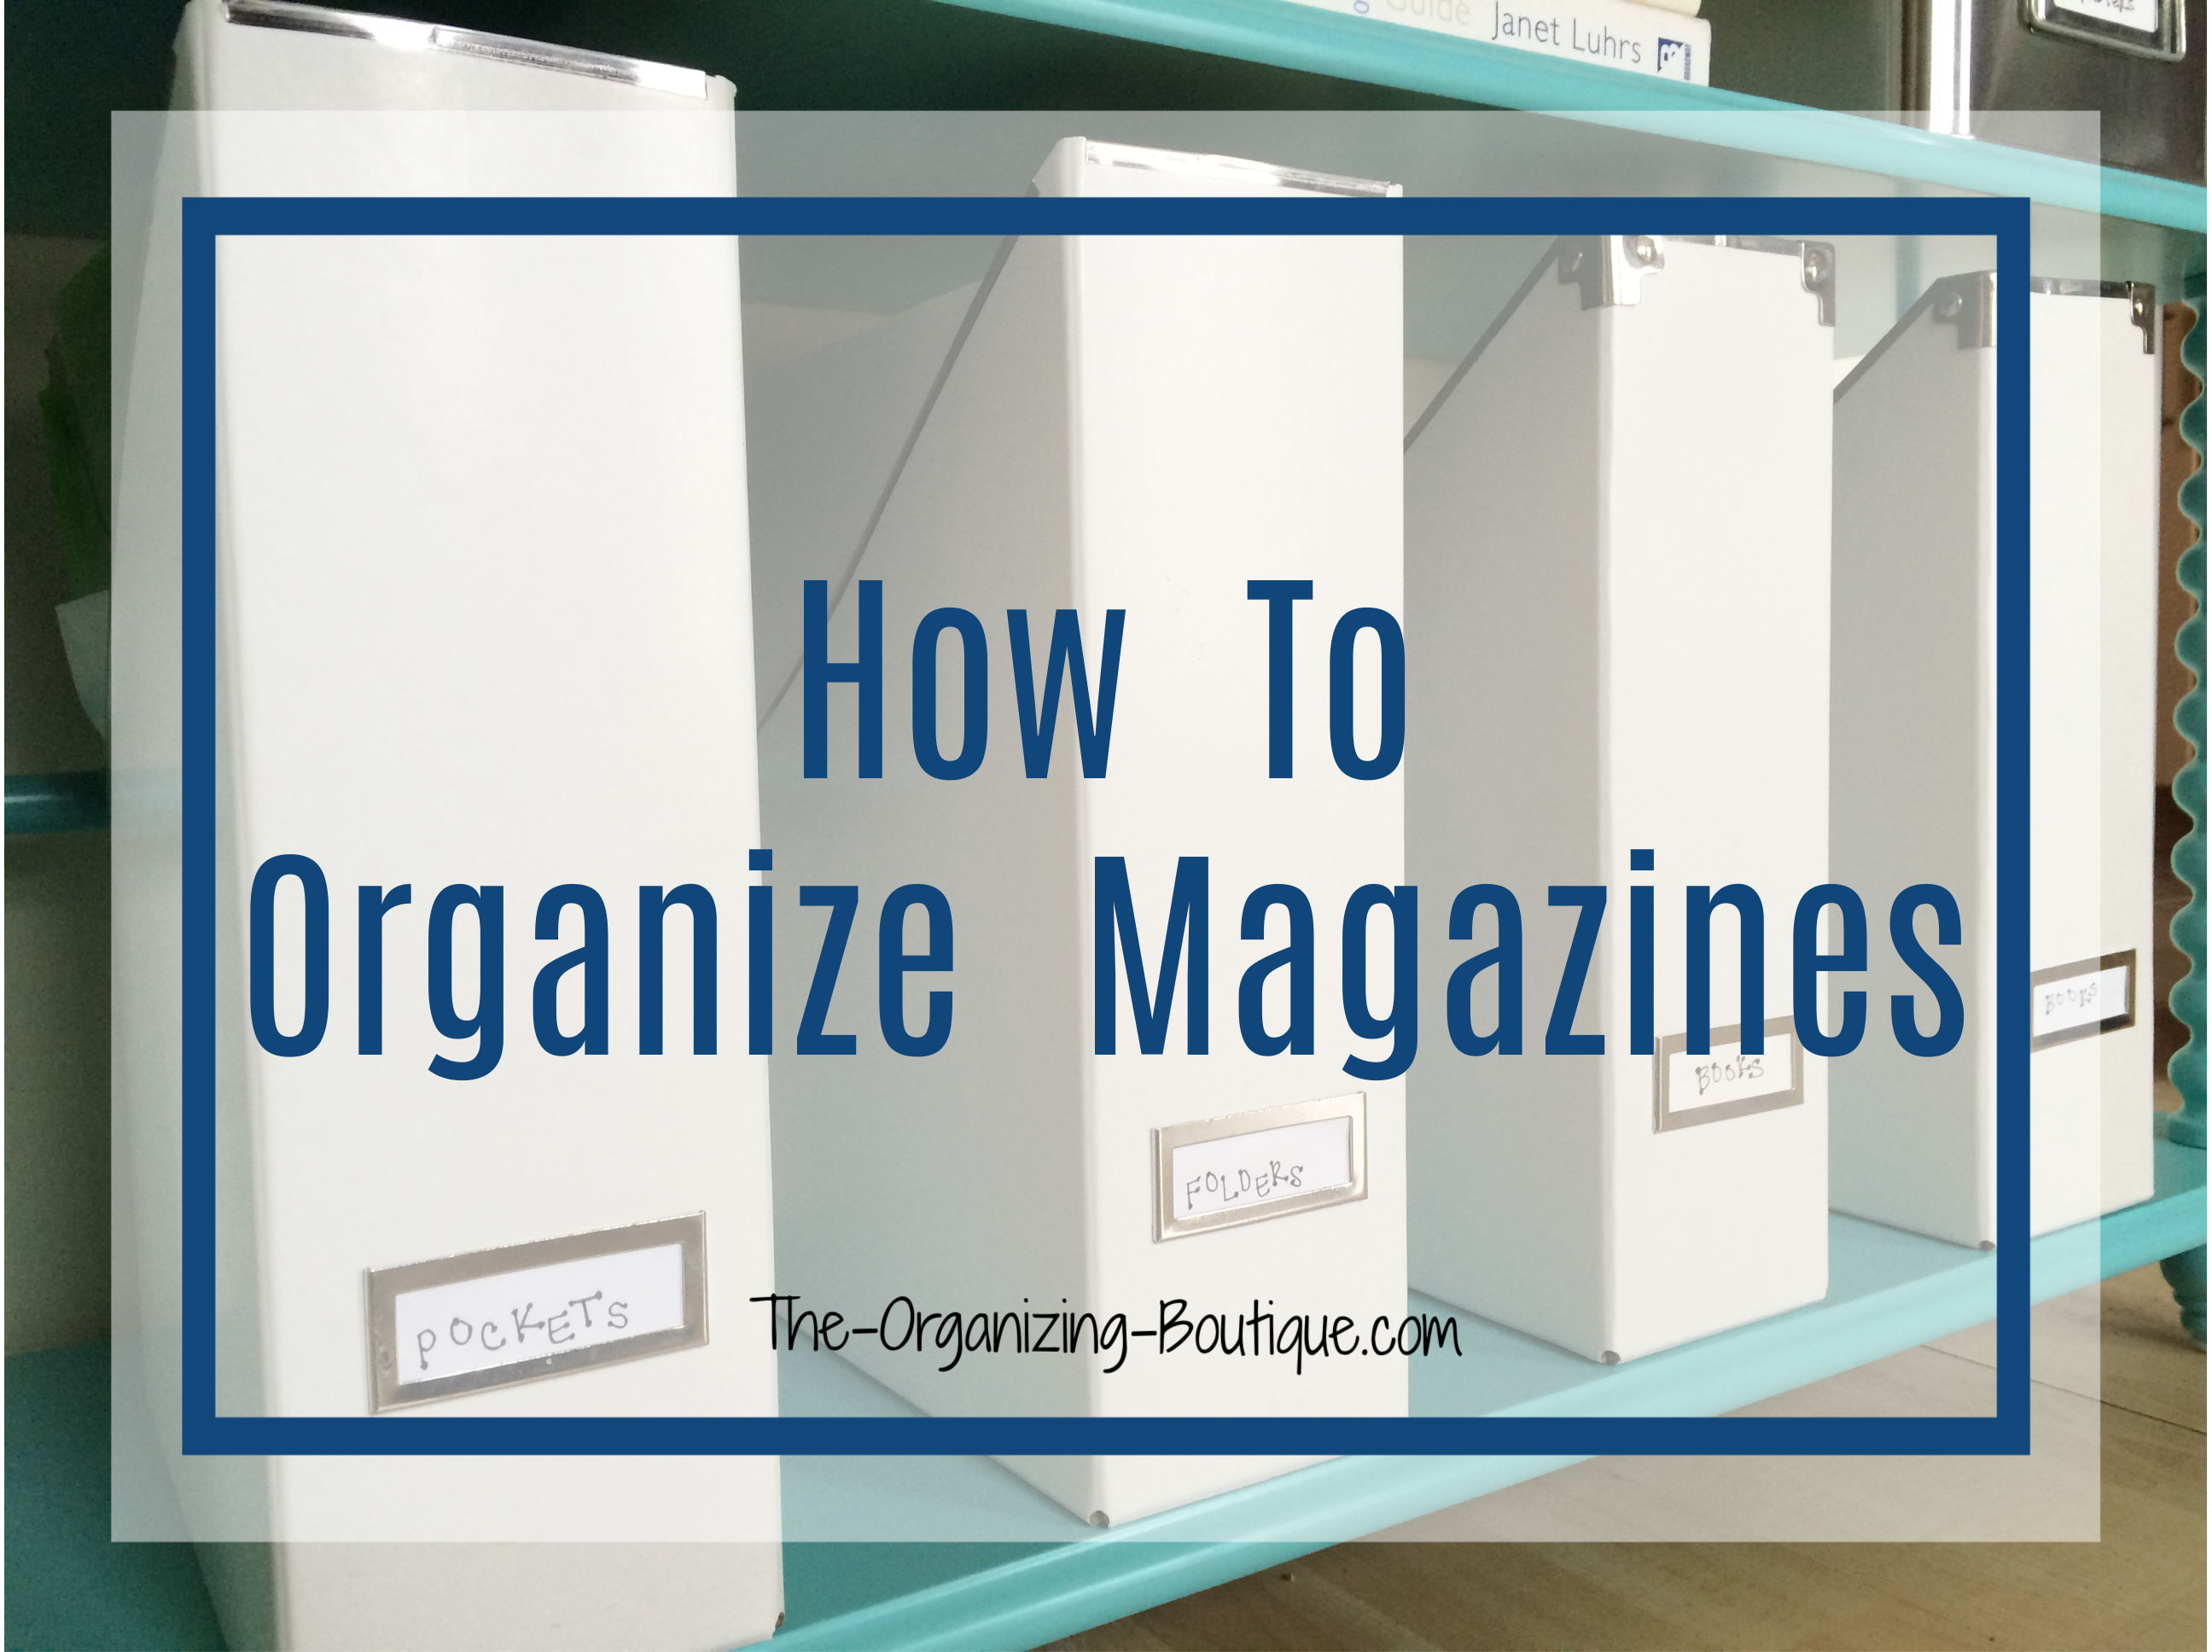 Organizing paper clutter includes magazines. Here's the magazine organizing process as well as product suggestions (like a magazine storage box.)